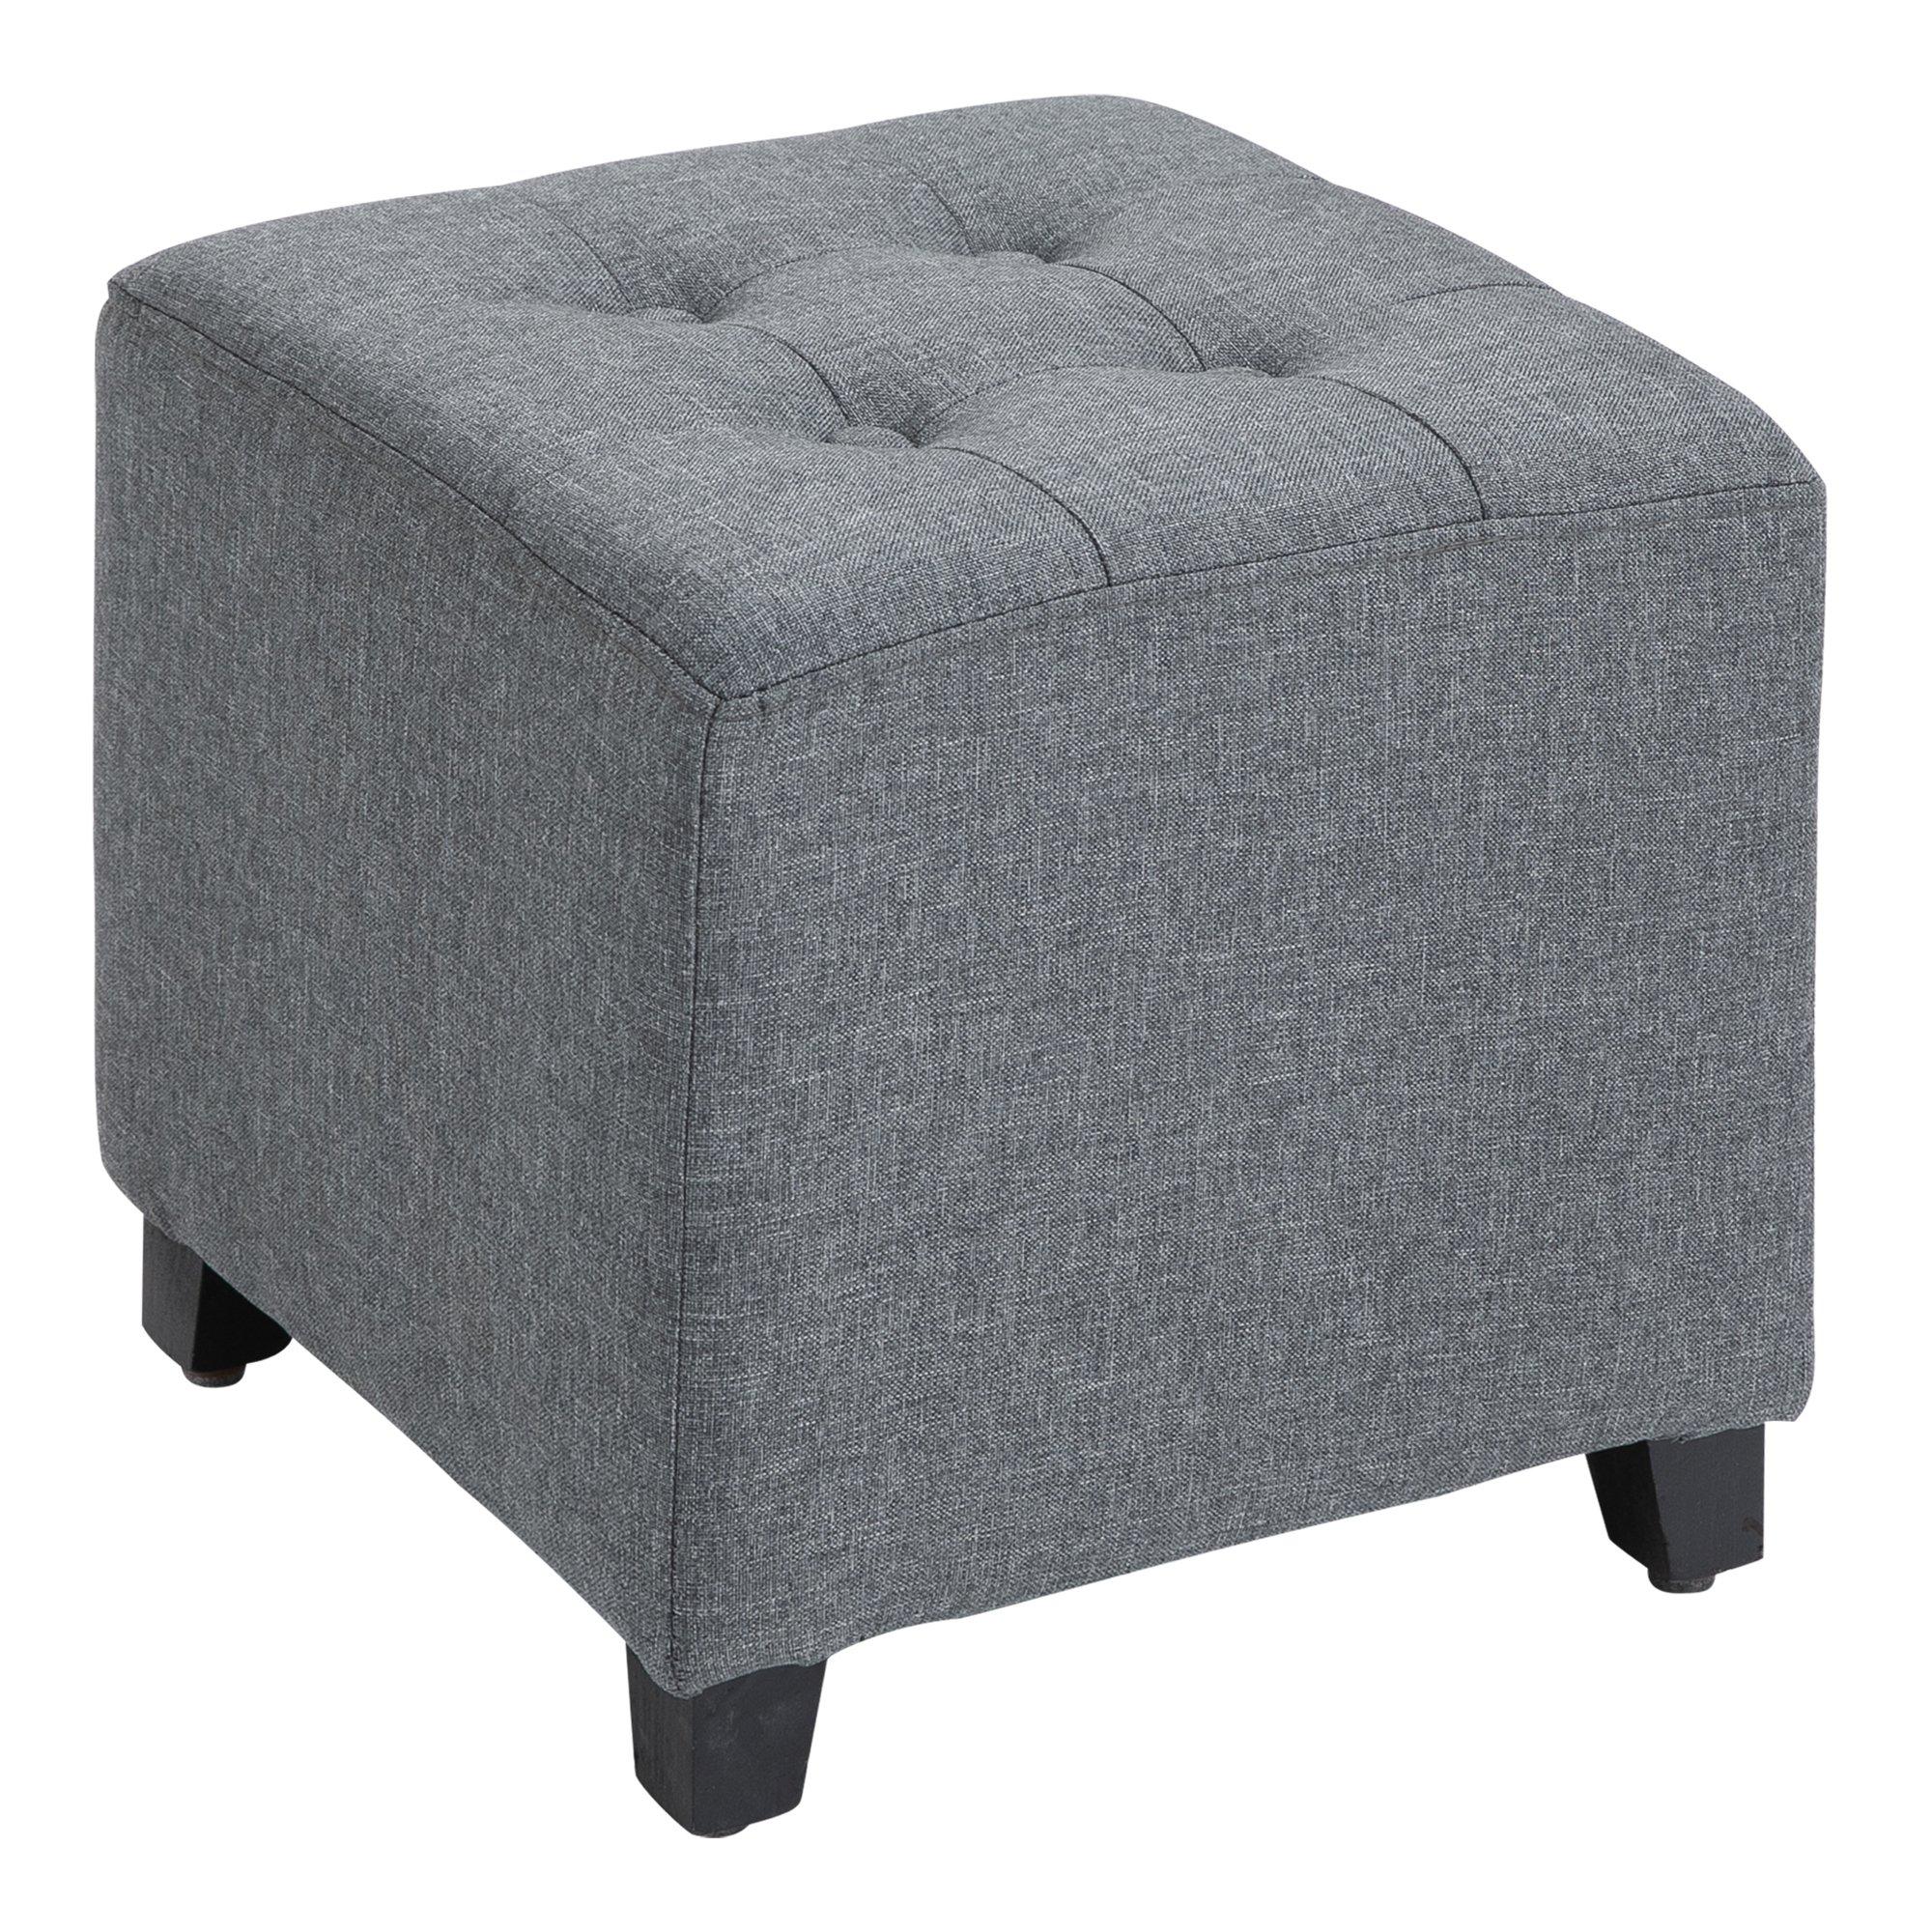 Linen-Look Square Ottoman Footstool with Button Tufts Wood Frame